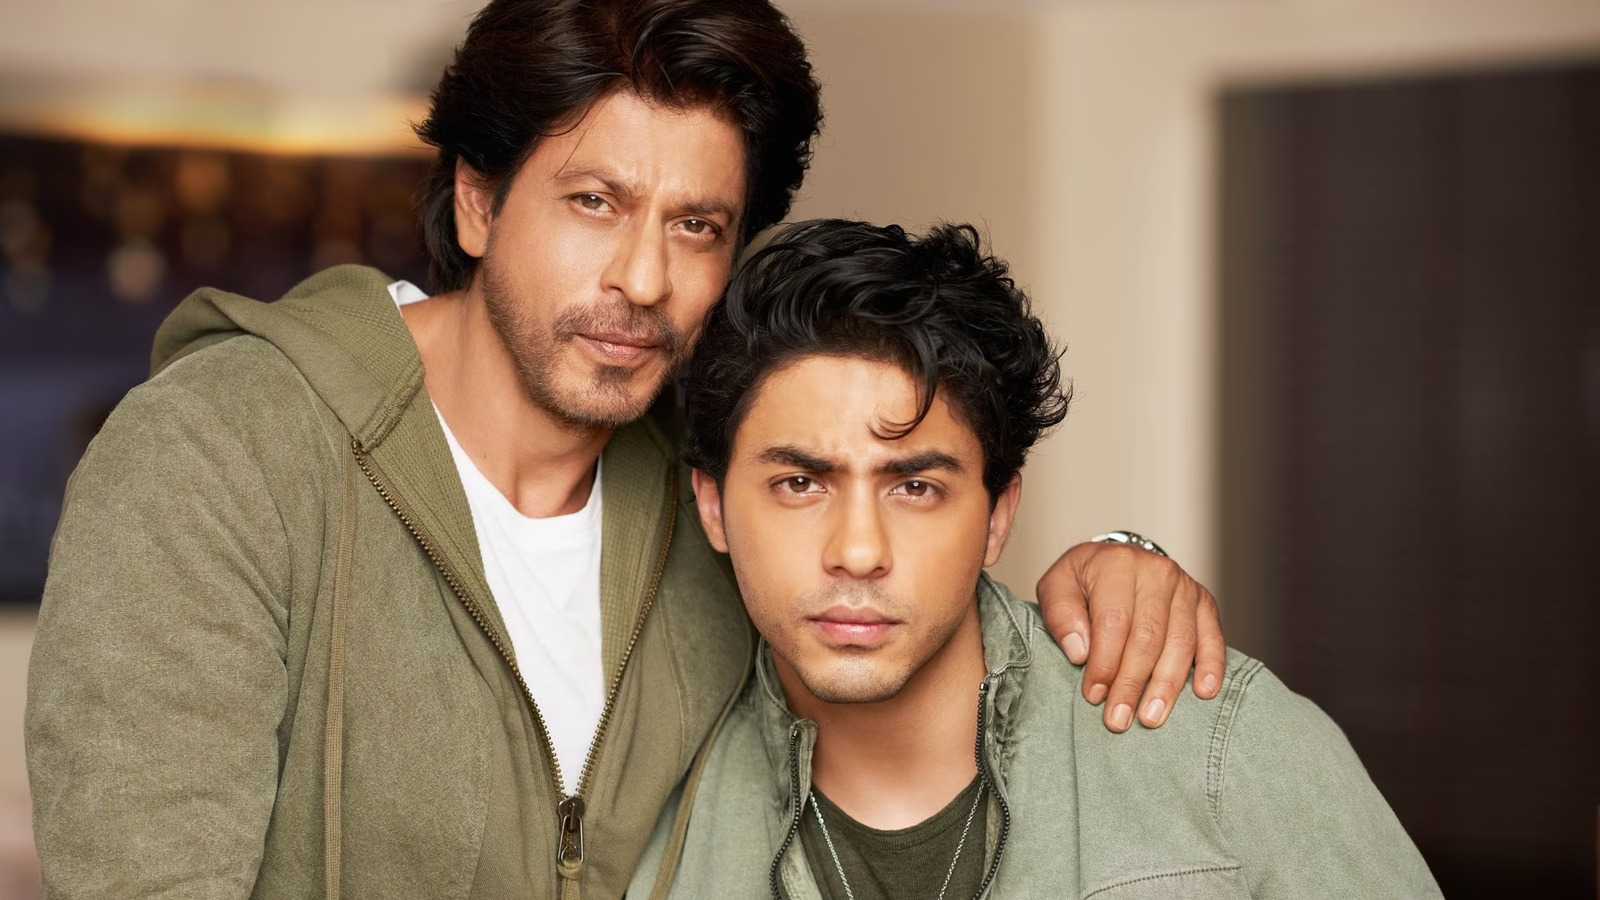 Stardom: Aryan Khan's approach to work differs from his father Shah Rukh Khan; here's how